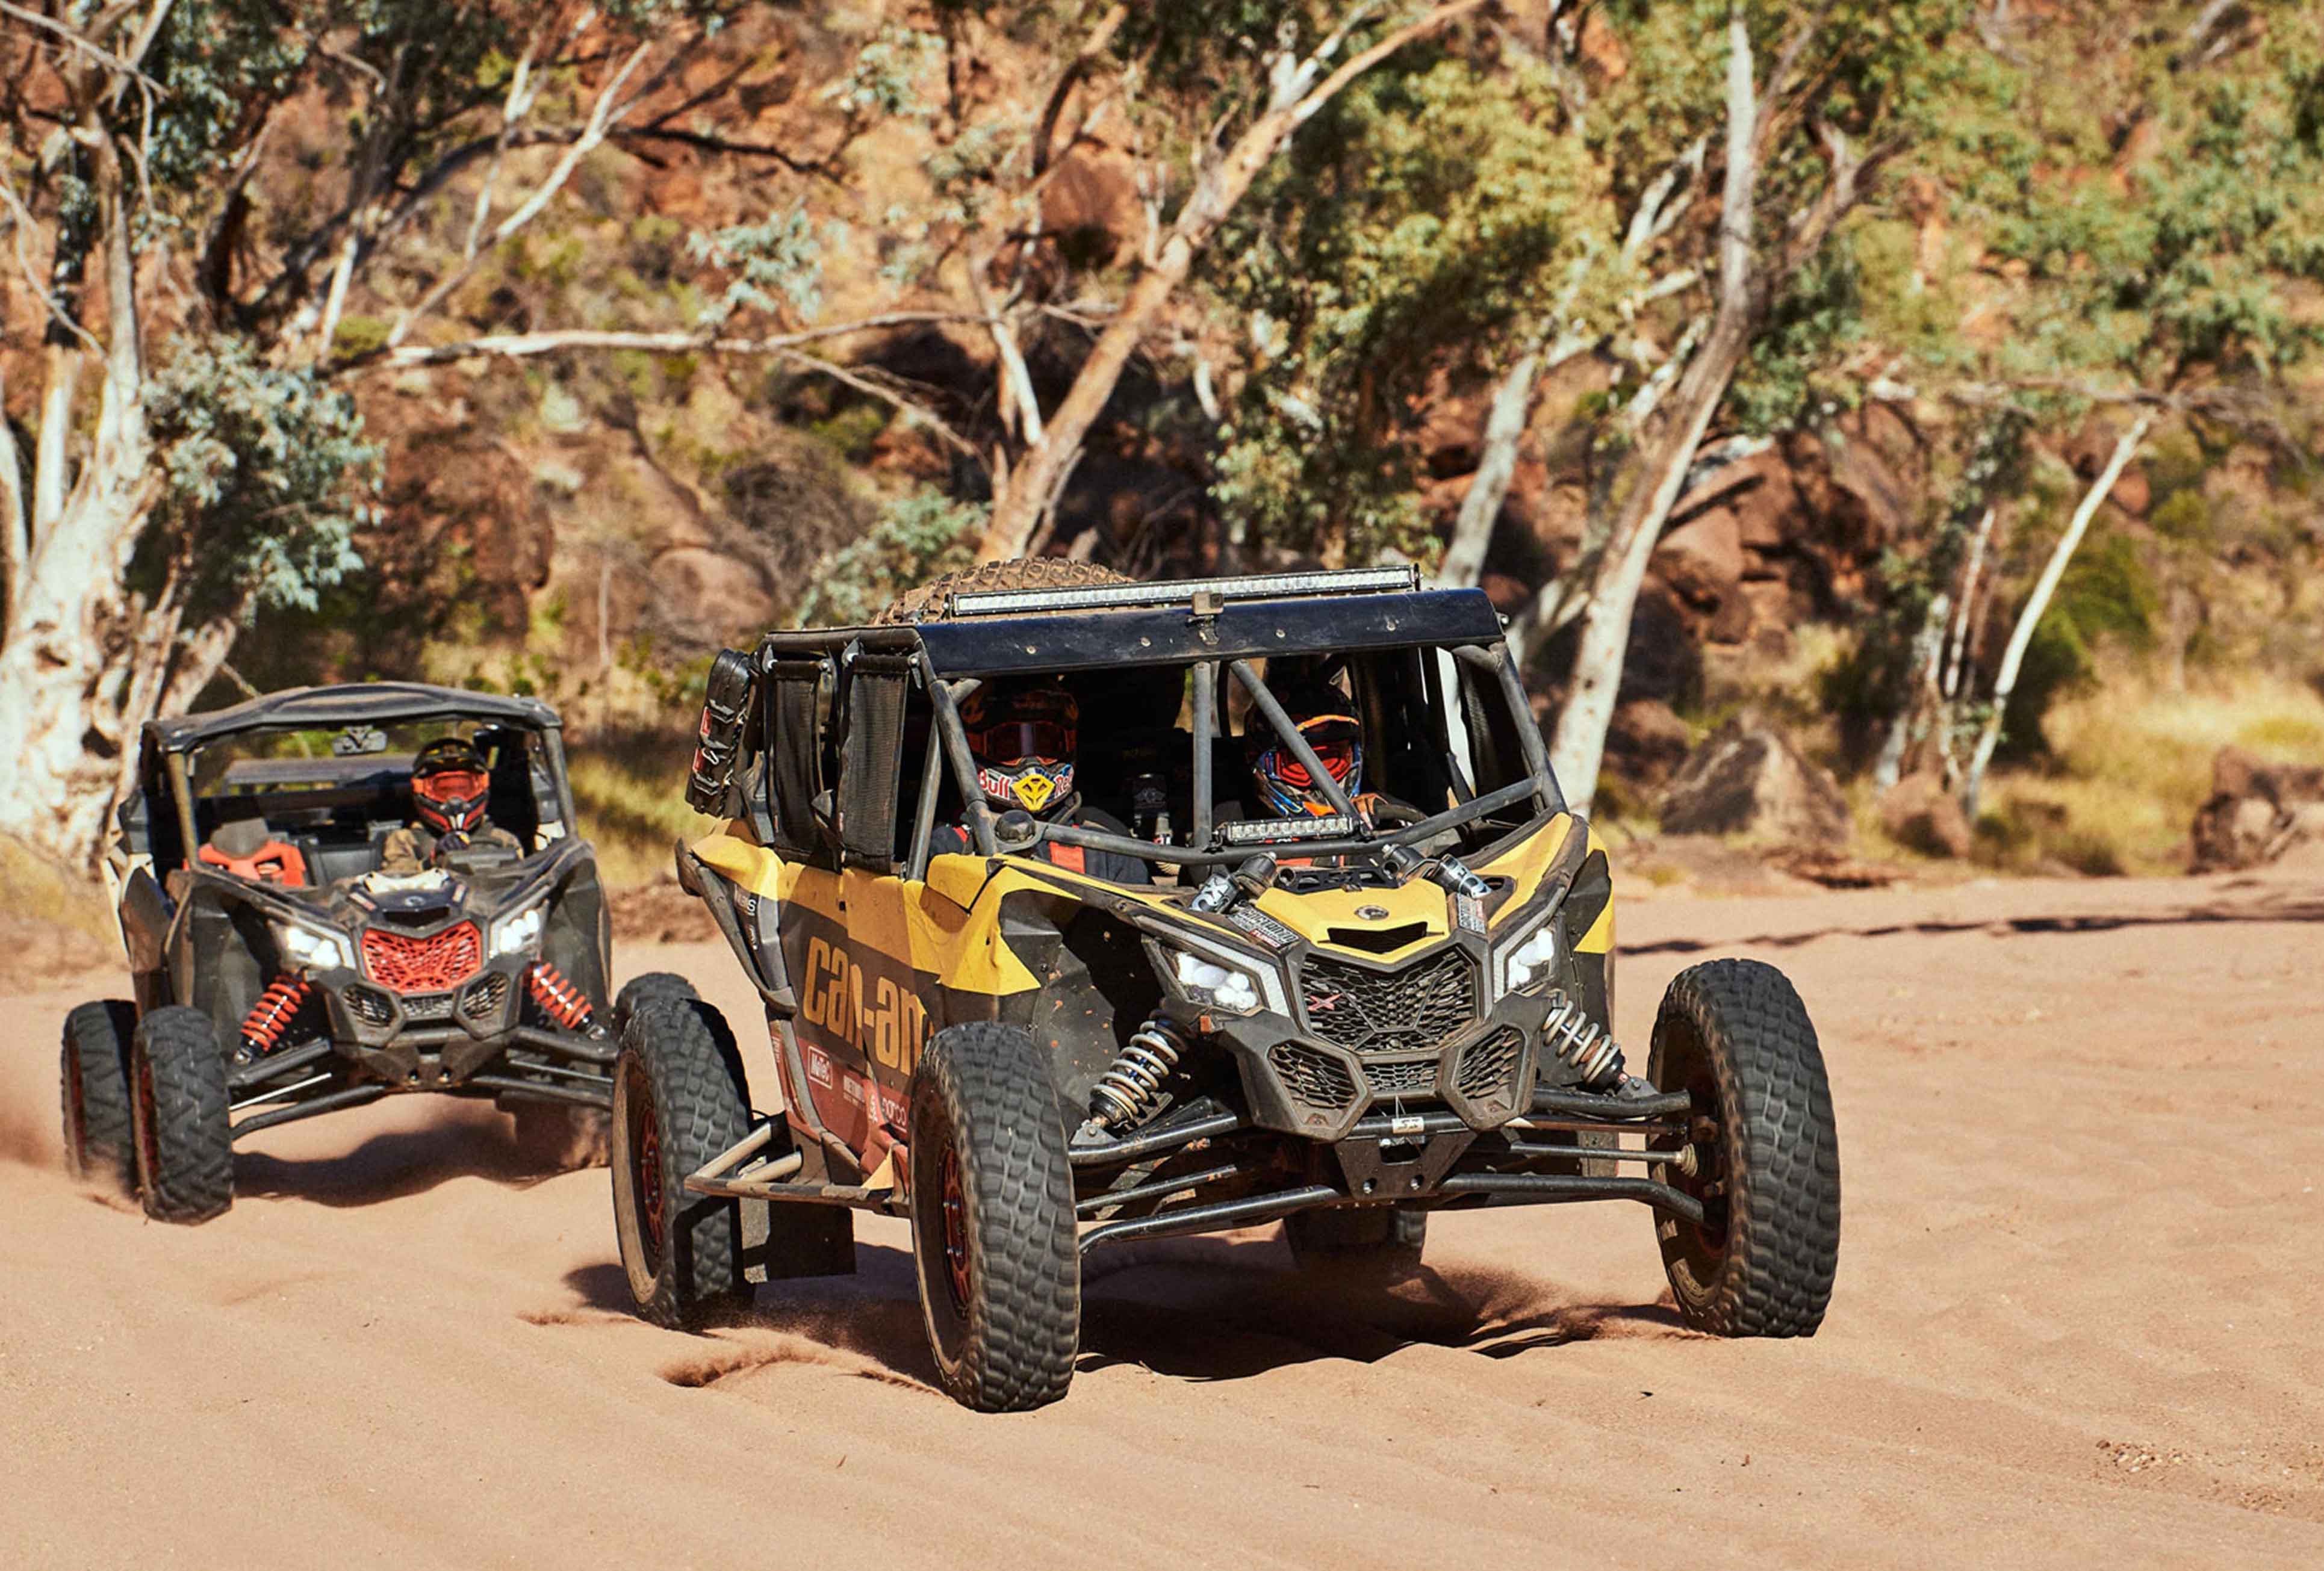 Toby Price and three of his mate set off on an unforgettable adventure through Australia's famous Red Centre.